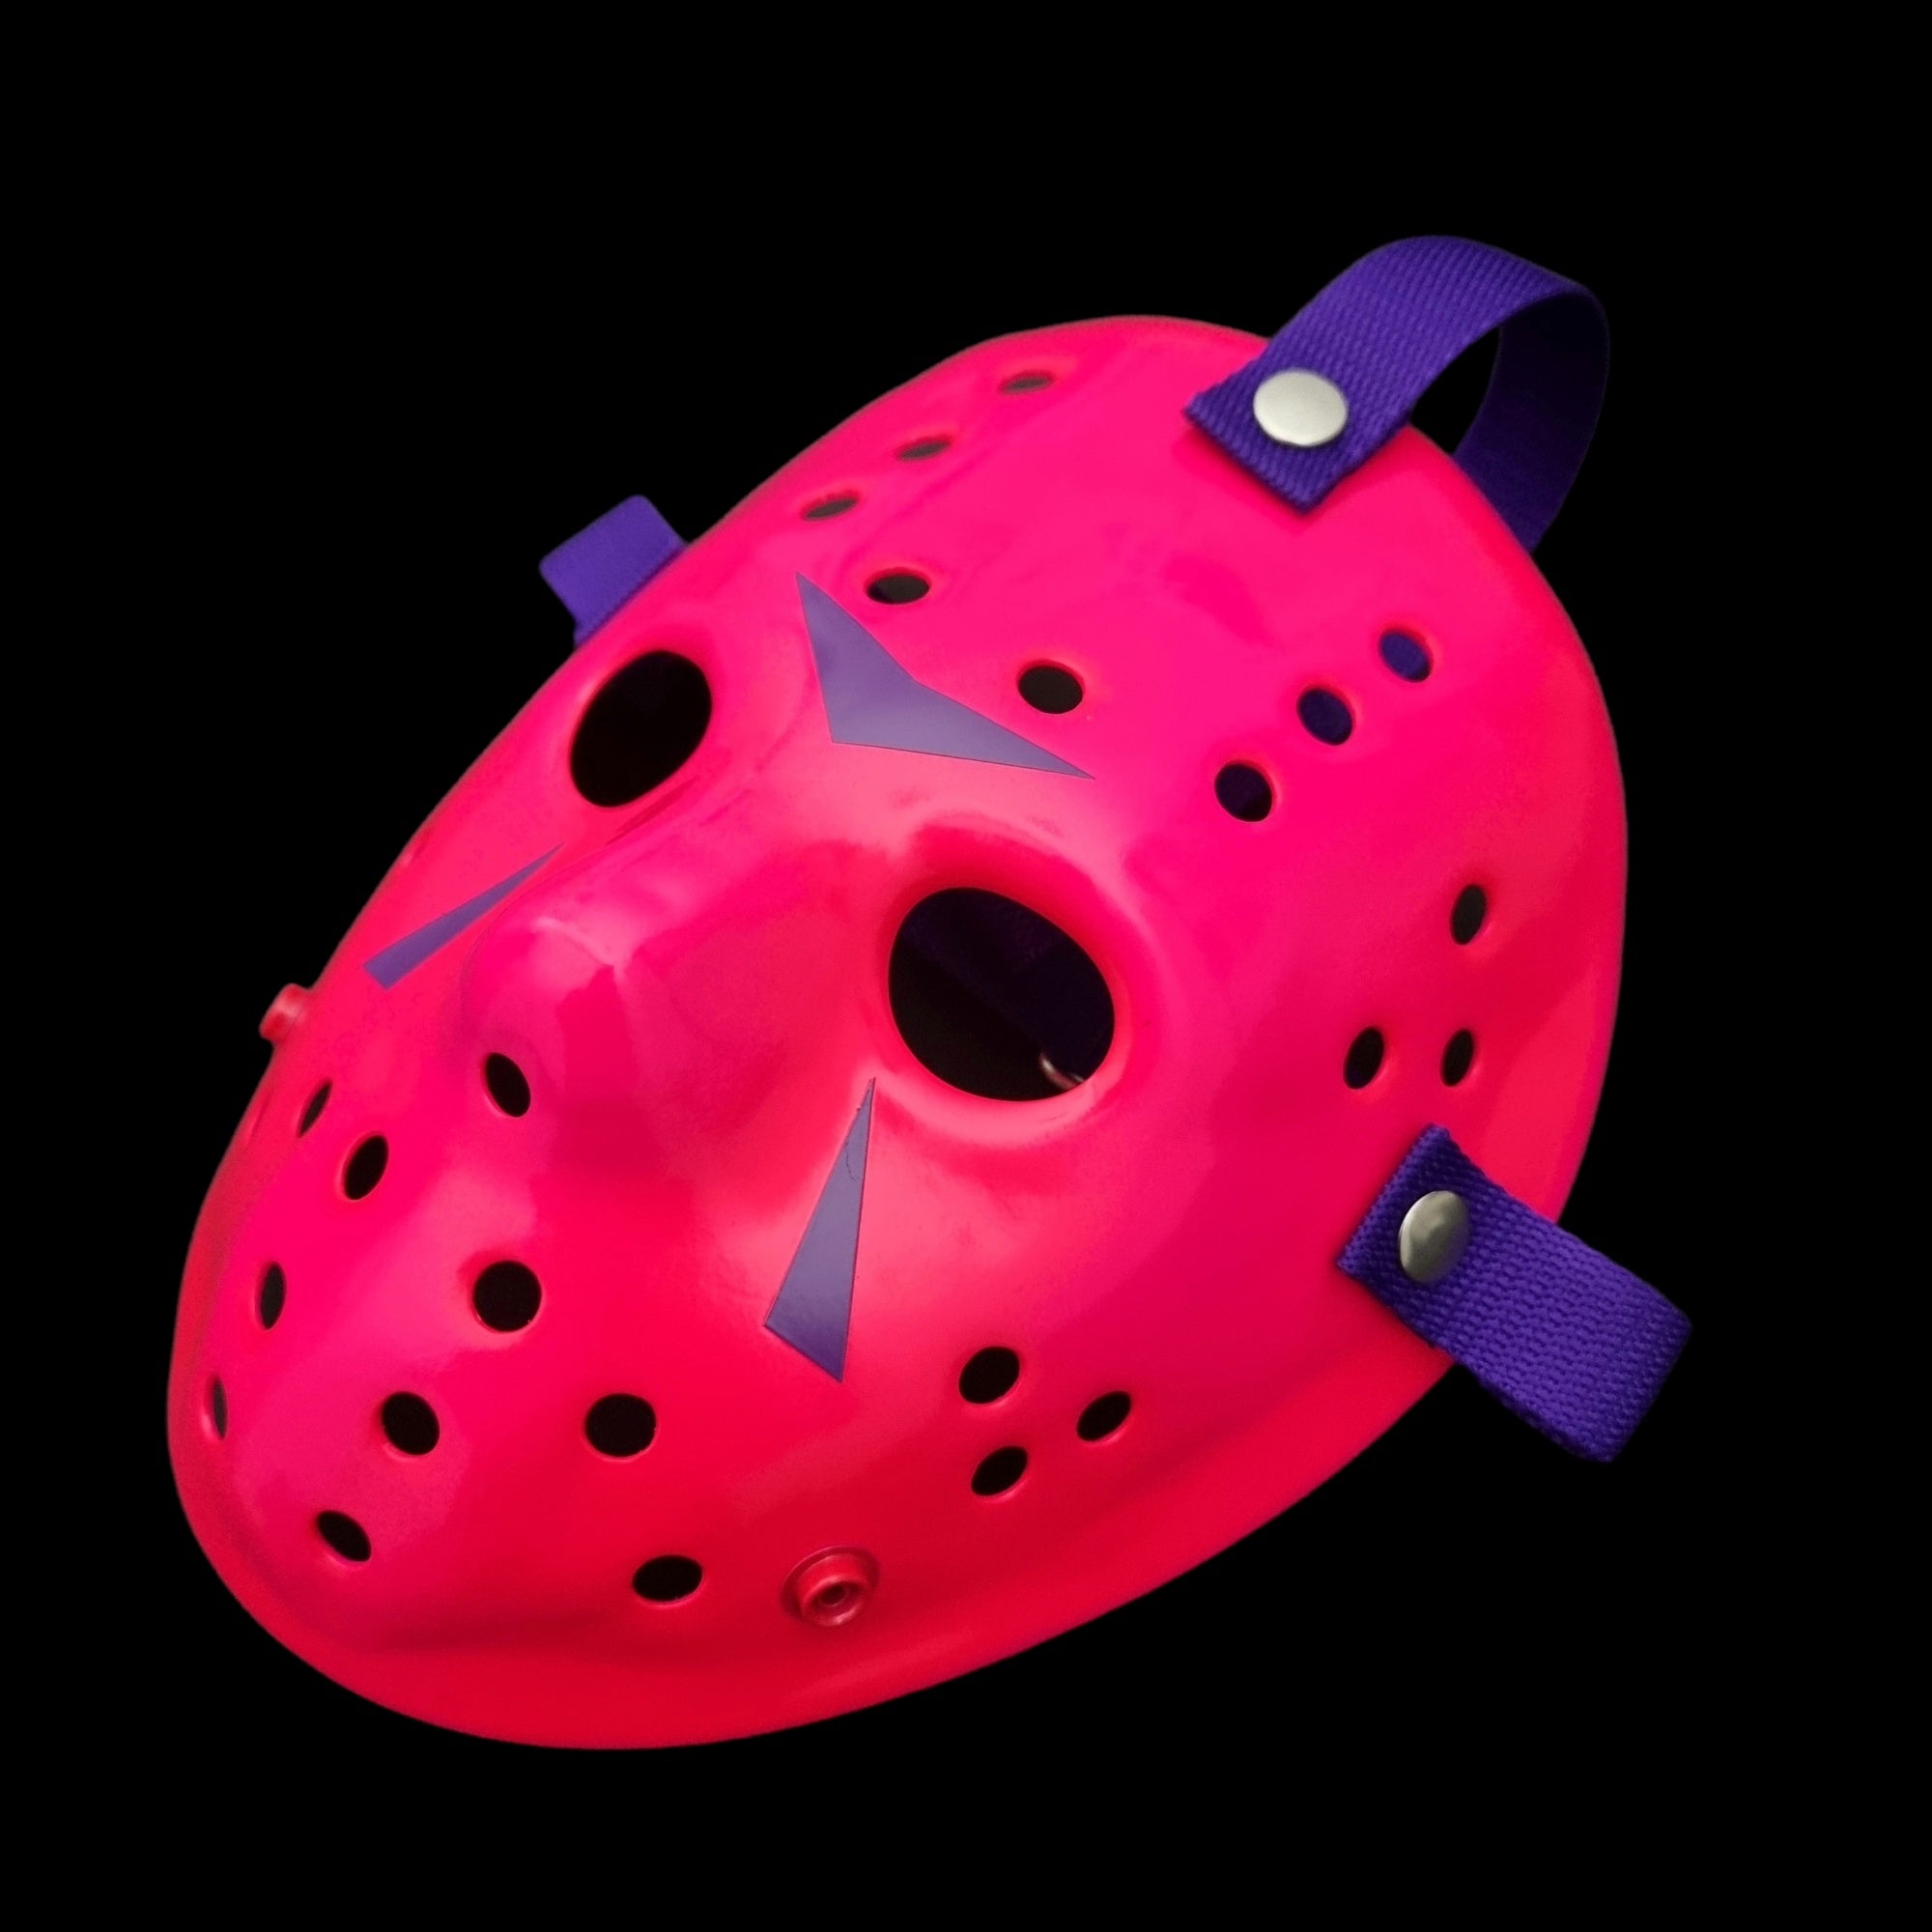 Miami Vice Neon Pink Blue Rave Jason Voorhees Friday the 13th 